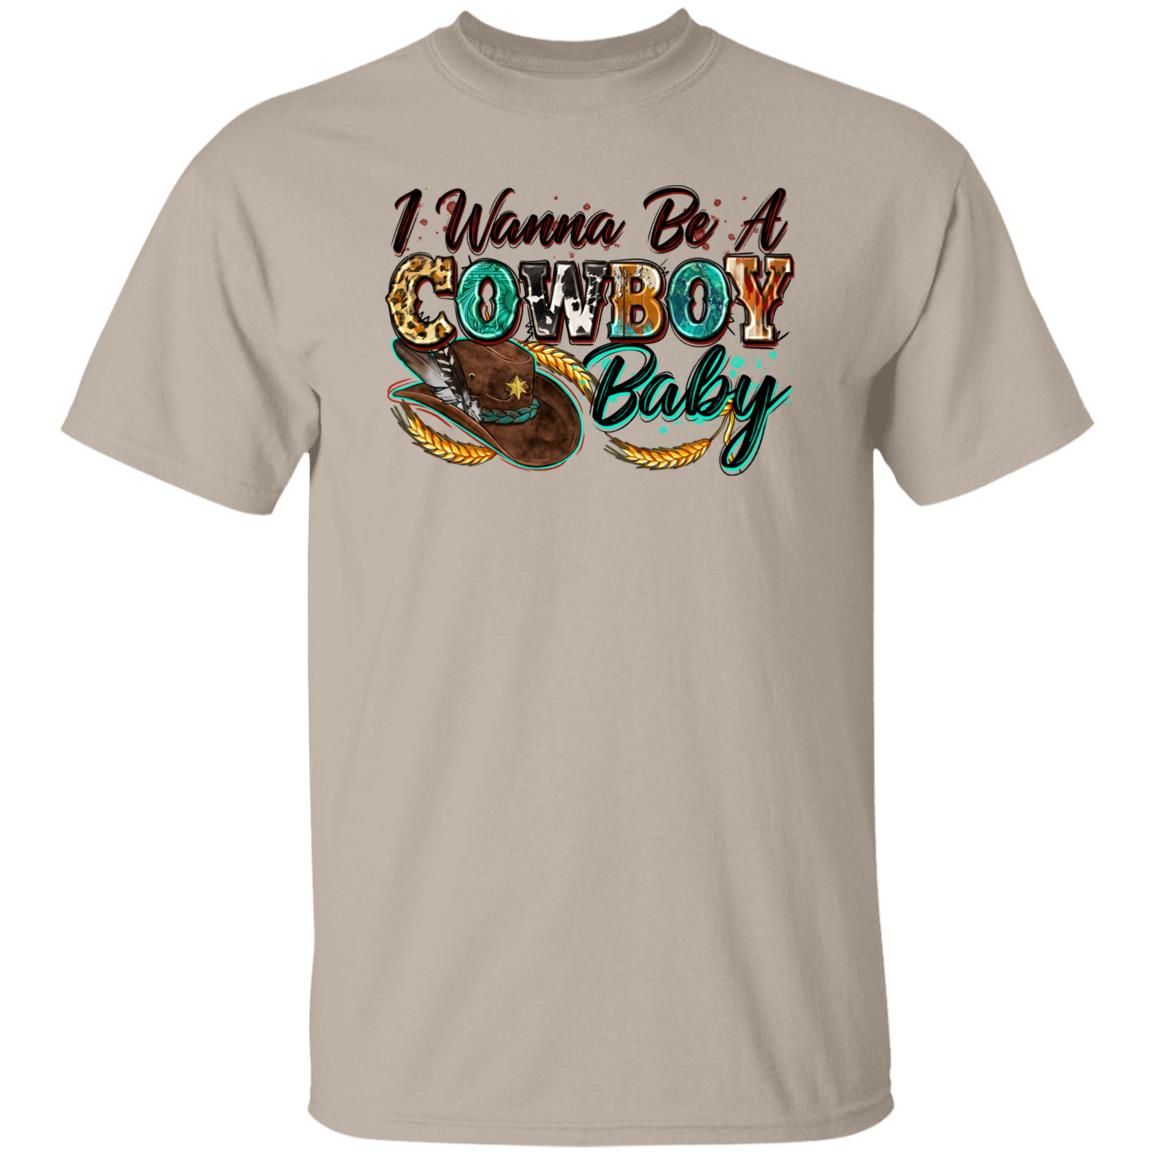 I wanna be a cowboy baby T-Shirt Cowboy girlfriend cowgirl Unisex Tee Sand White Sport Grey-Family-Gift-Planet